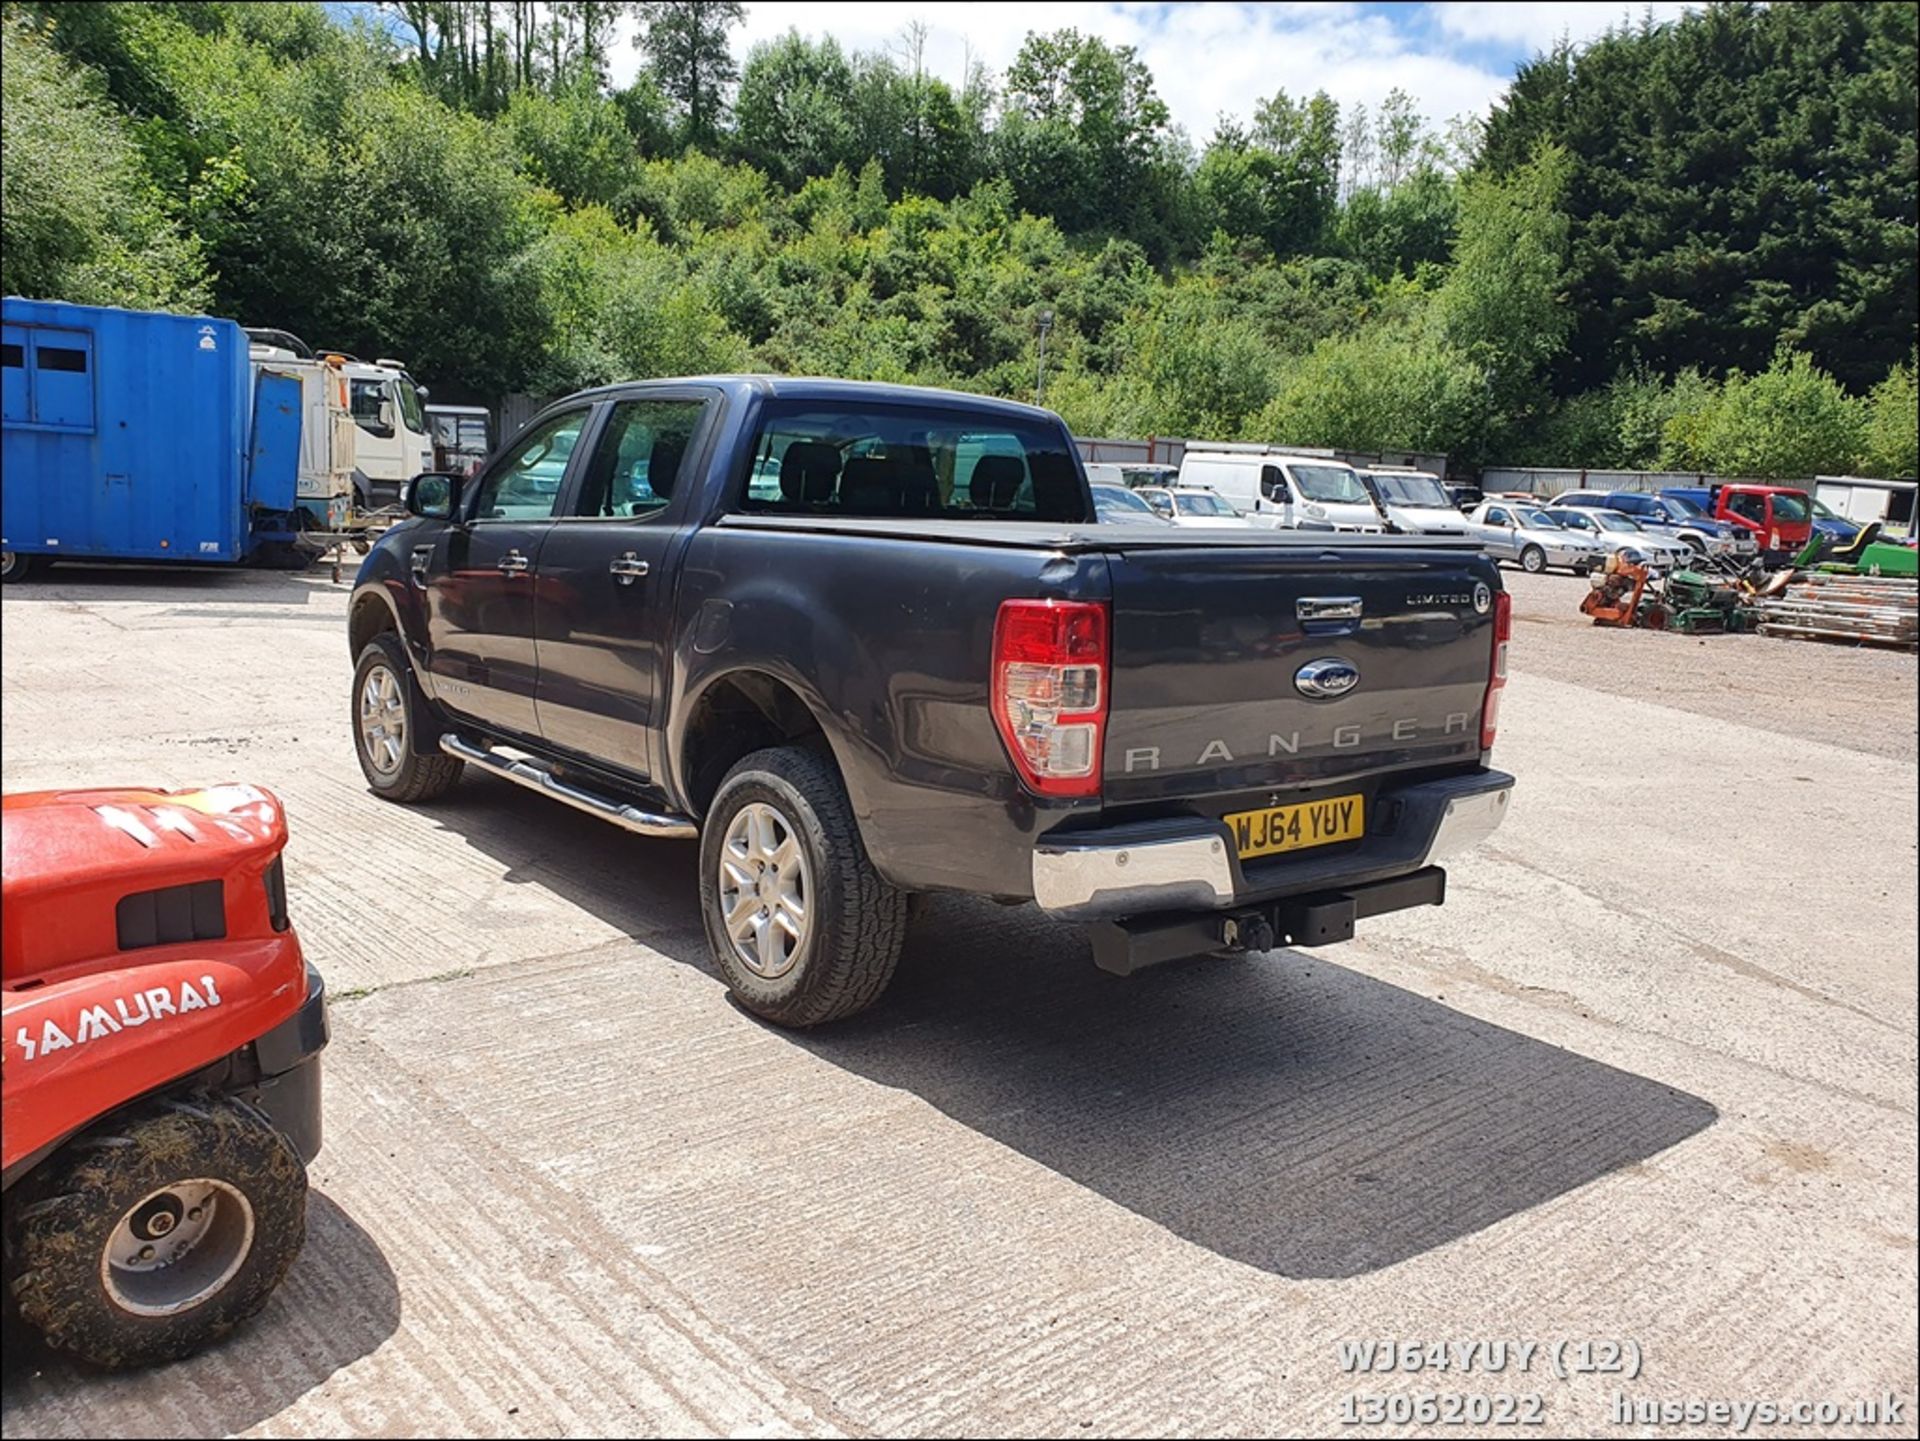 14/64 FORD RANGER LIMITED 4X4 TDCI - 2198cc 4dr 4x4 (Grey, 106k) - Image 12 of 43